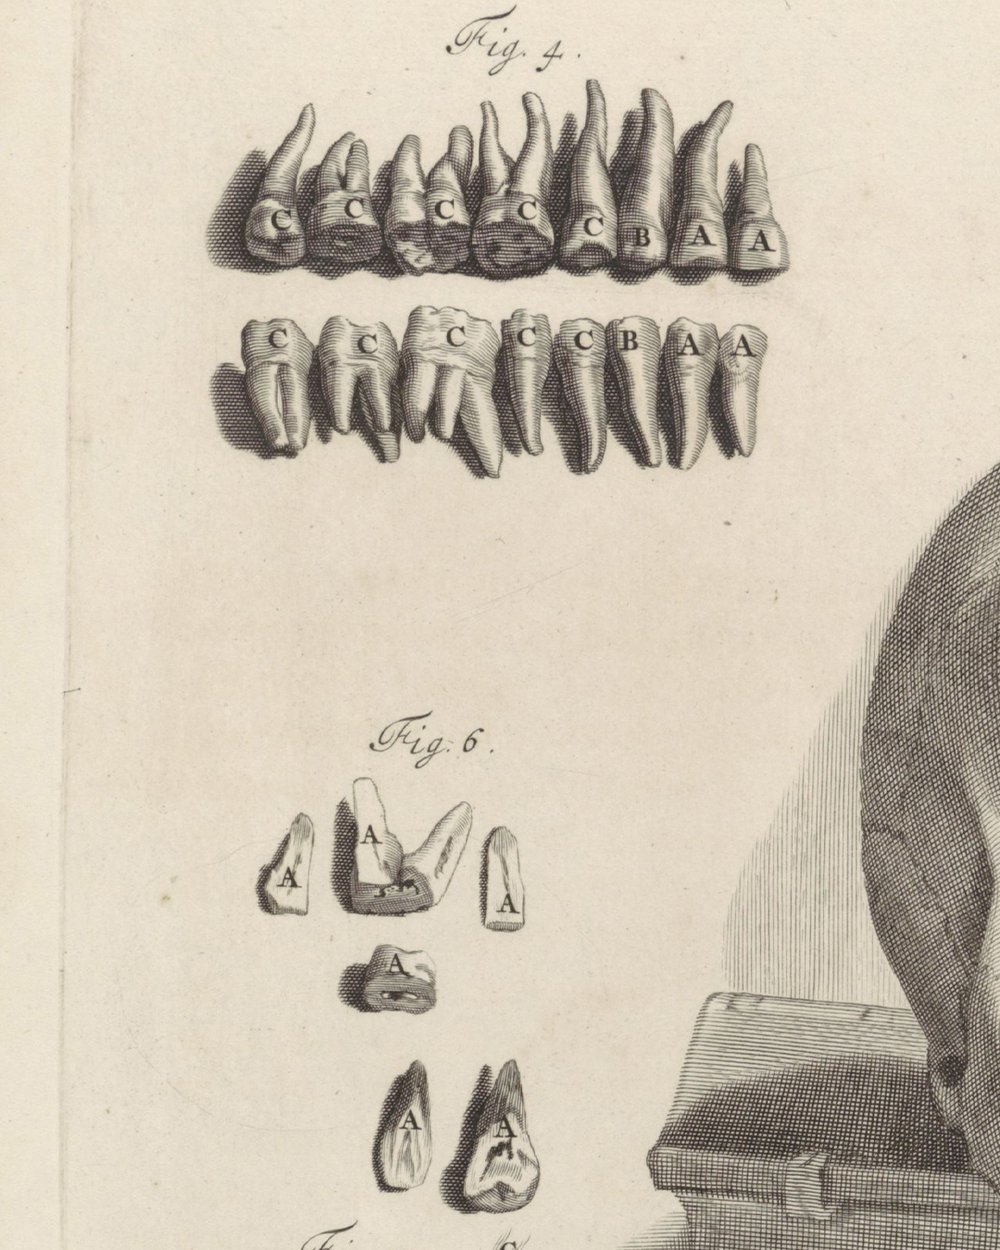 ''Anatomical study of a skull and the jaw'' (1685)